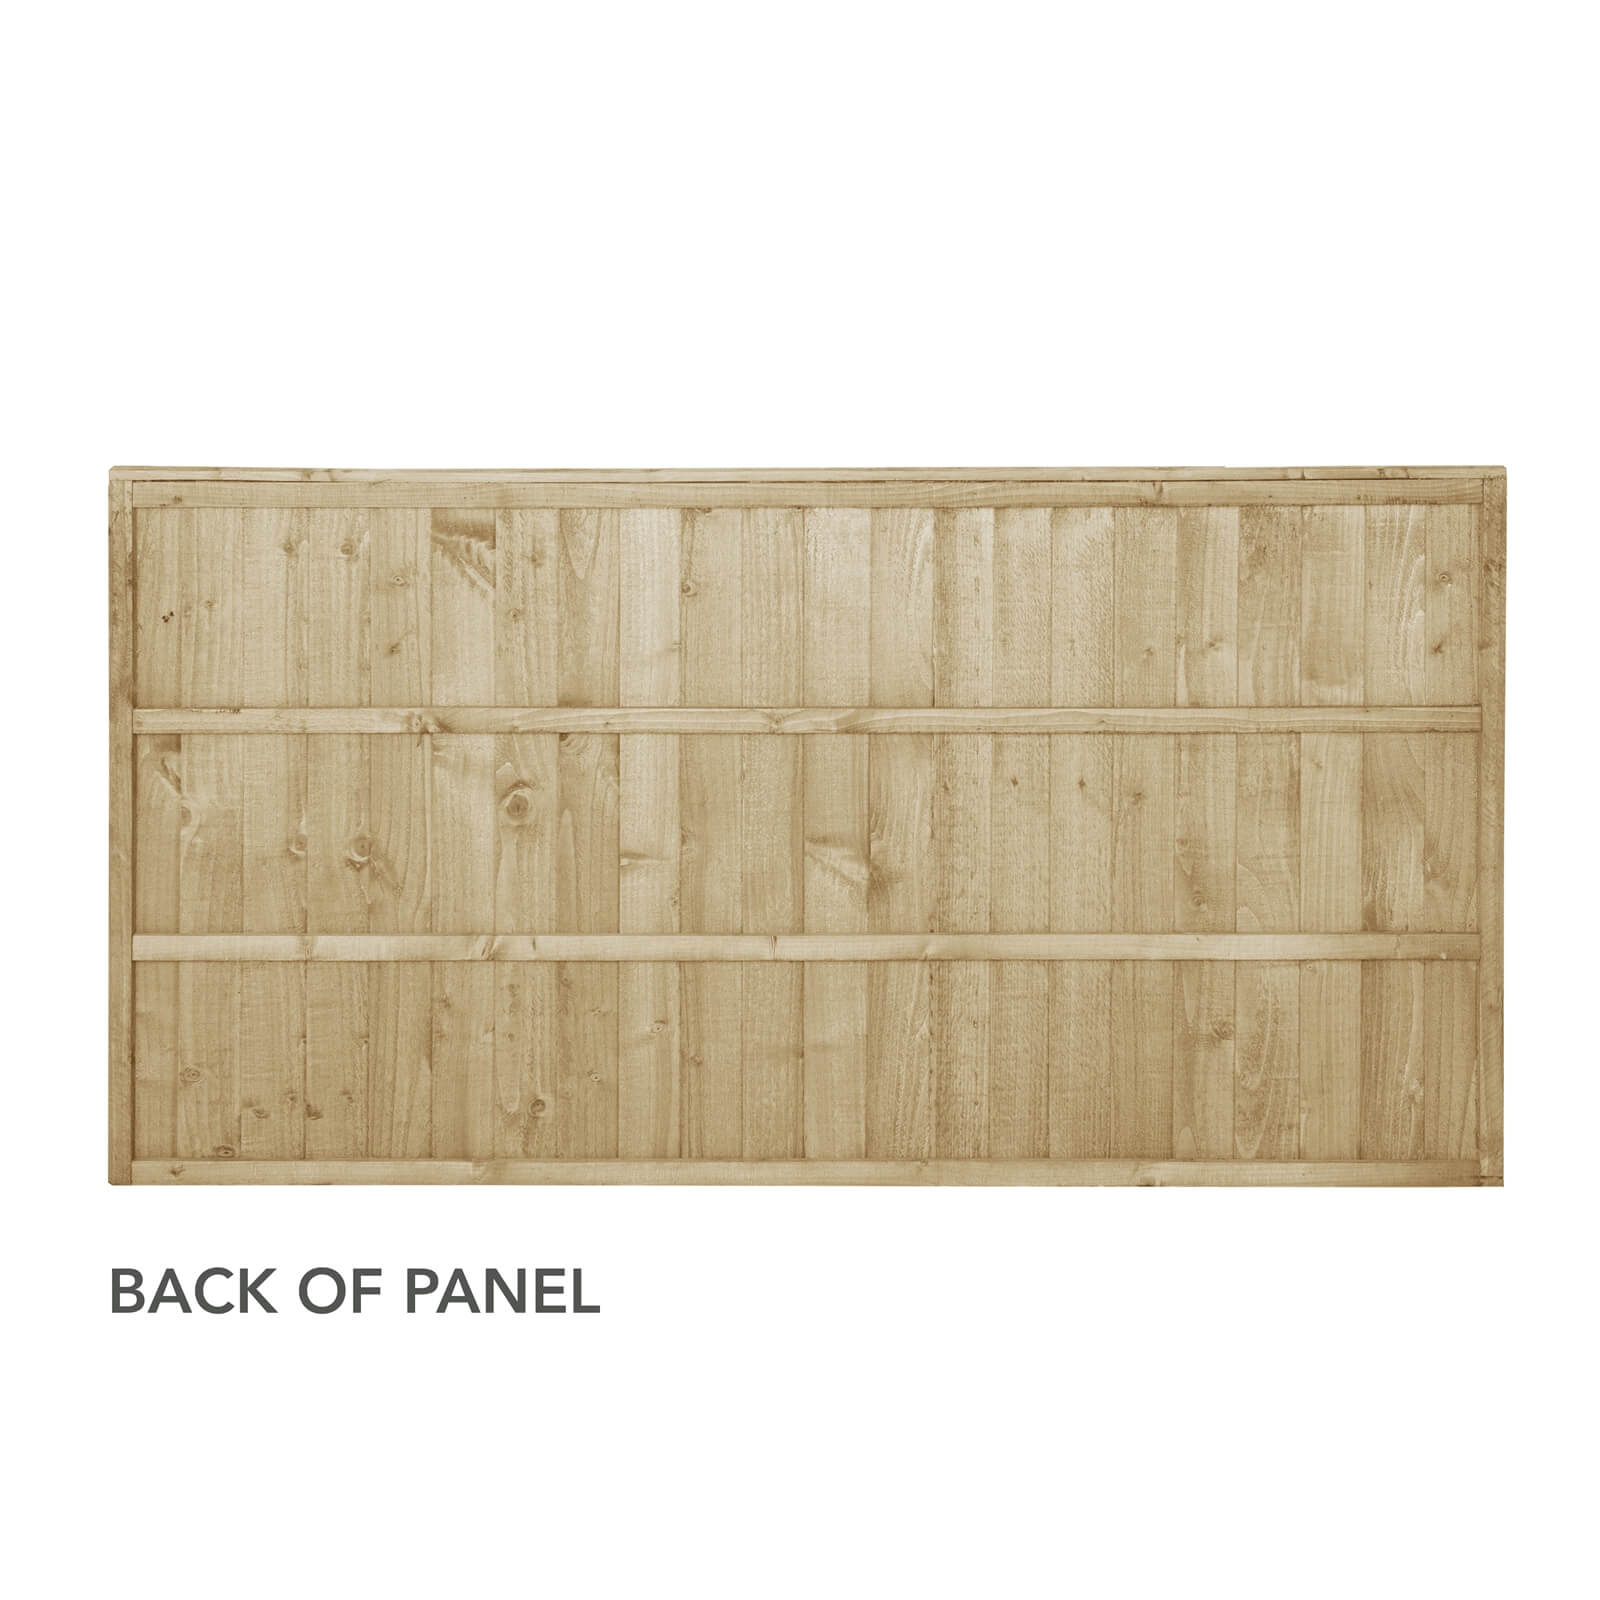 6ft x 3ft (1.83m x 0.91m) Pressure Treated Closeboard Fence Panel - Pack of 3